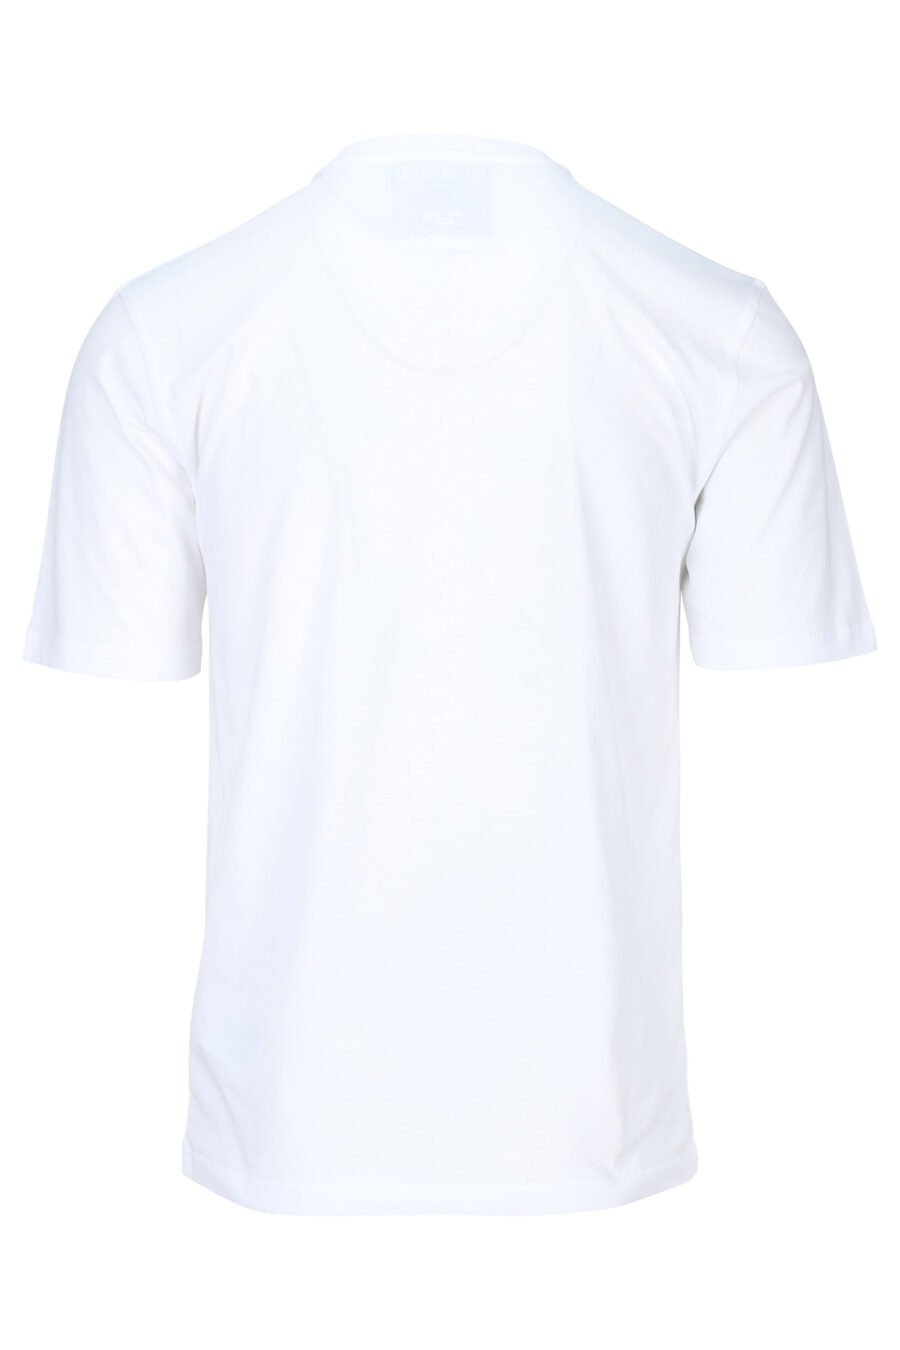 White T-shirt with mini logo "teddy tailor" - 667113124889 1